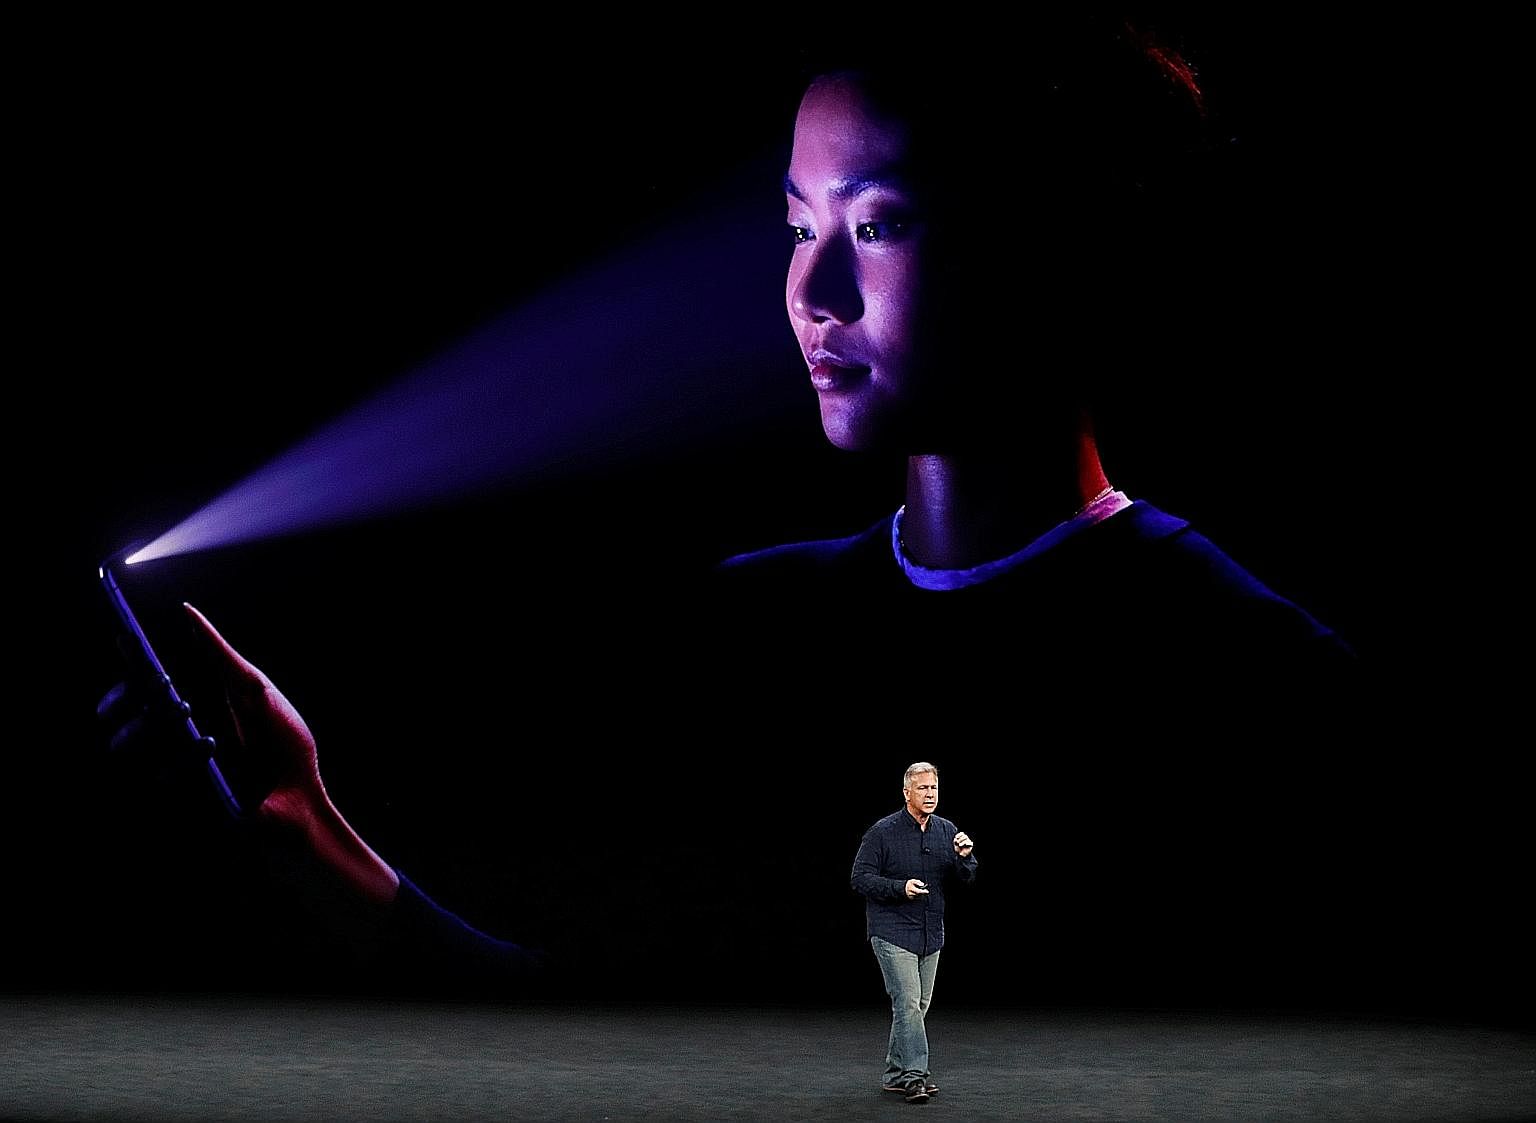 Mr Philip Schiller, Apple's senior vice-president of worldwide marketing, introducing the iPhone X at a launch event in Cupertino, California, on Tuesday.